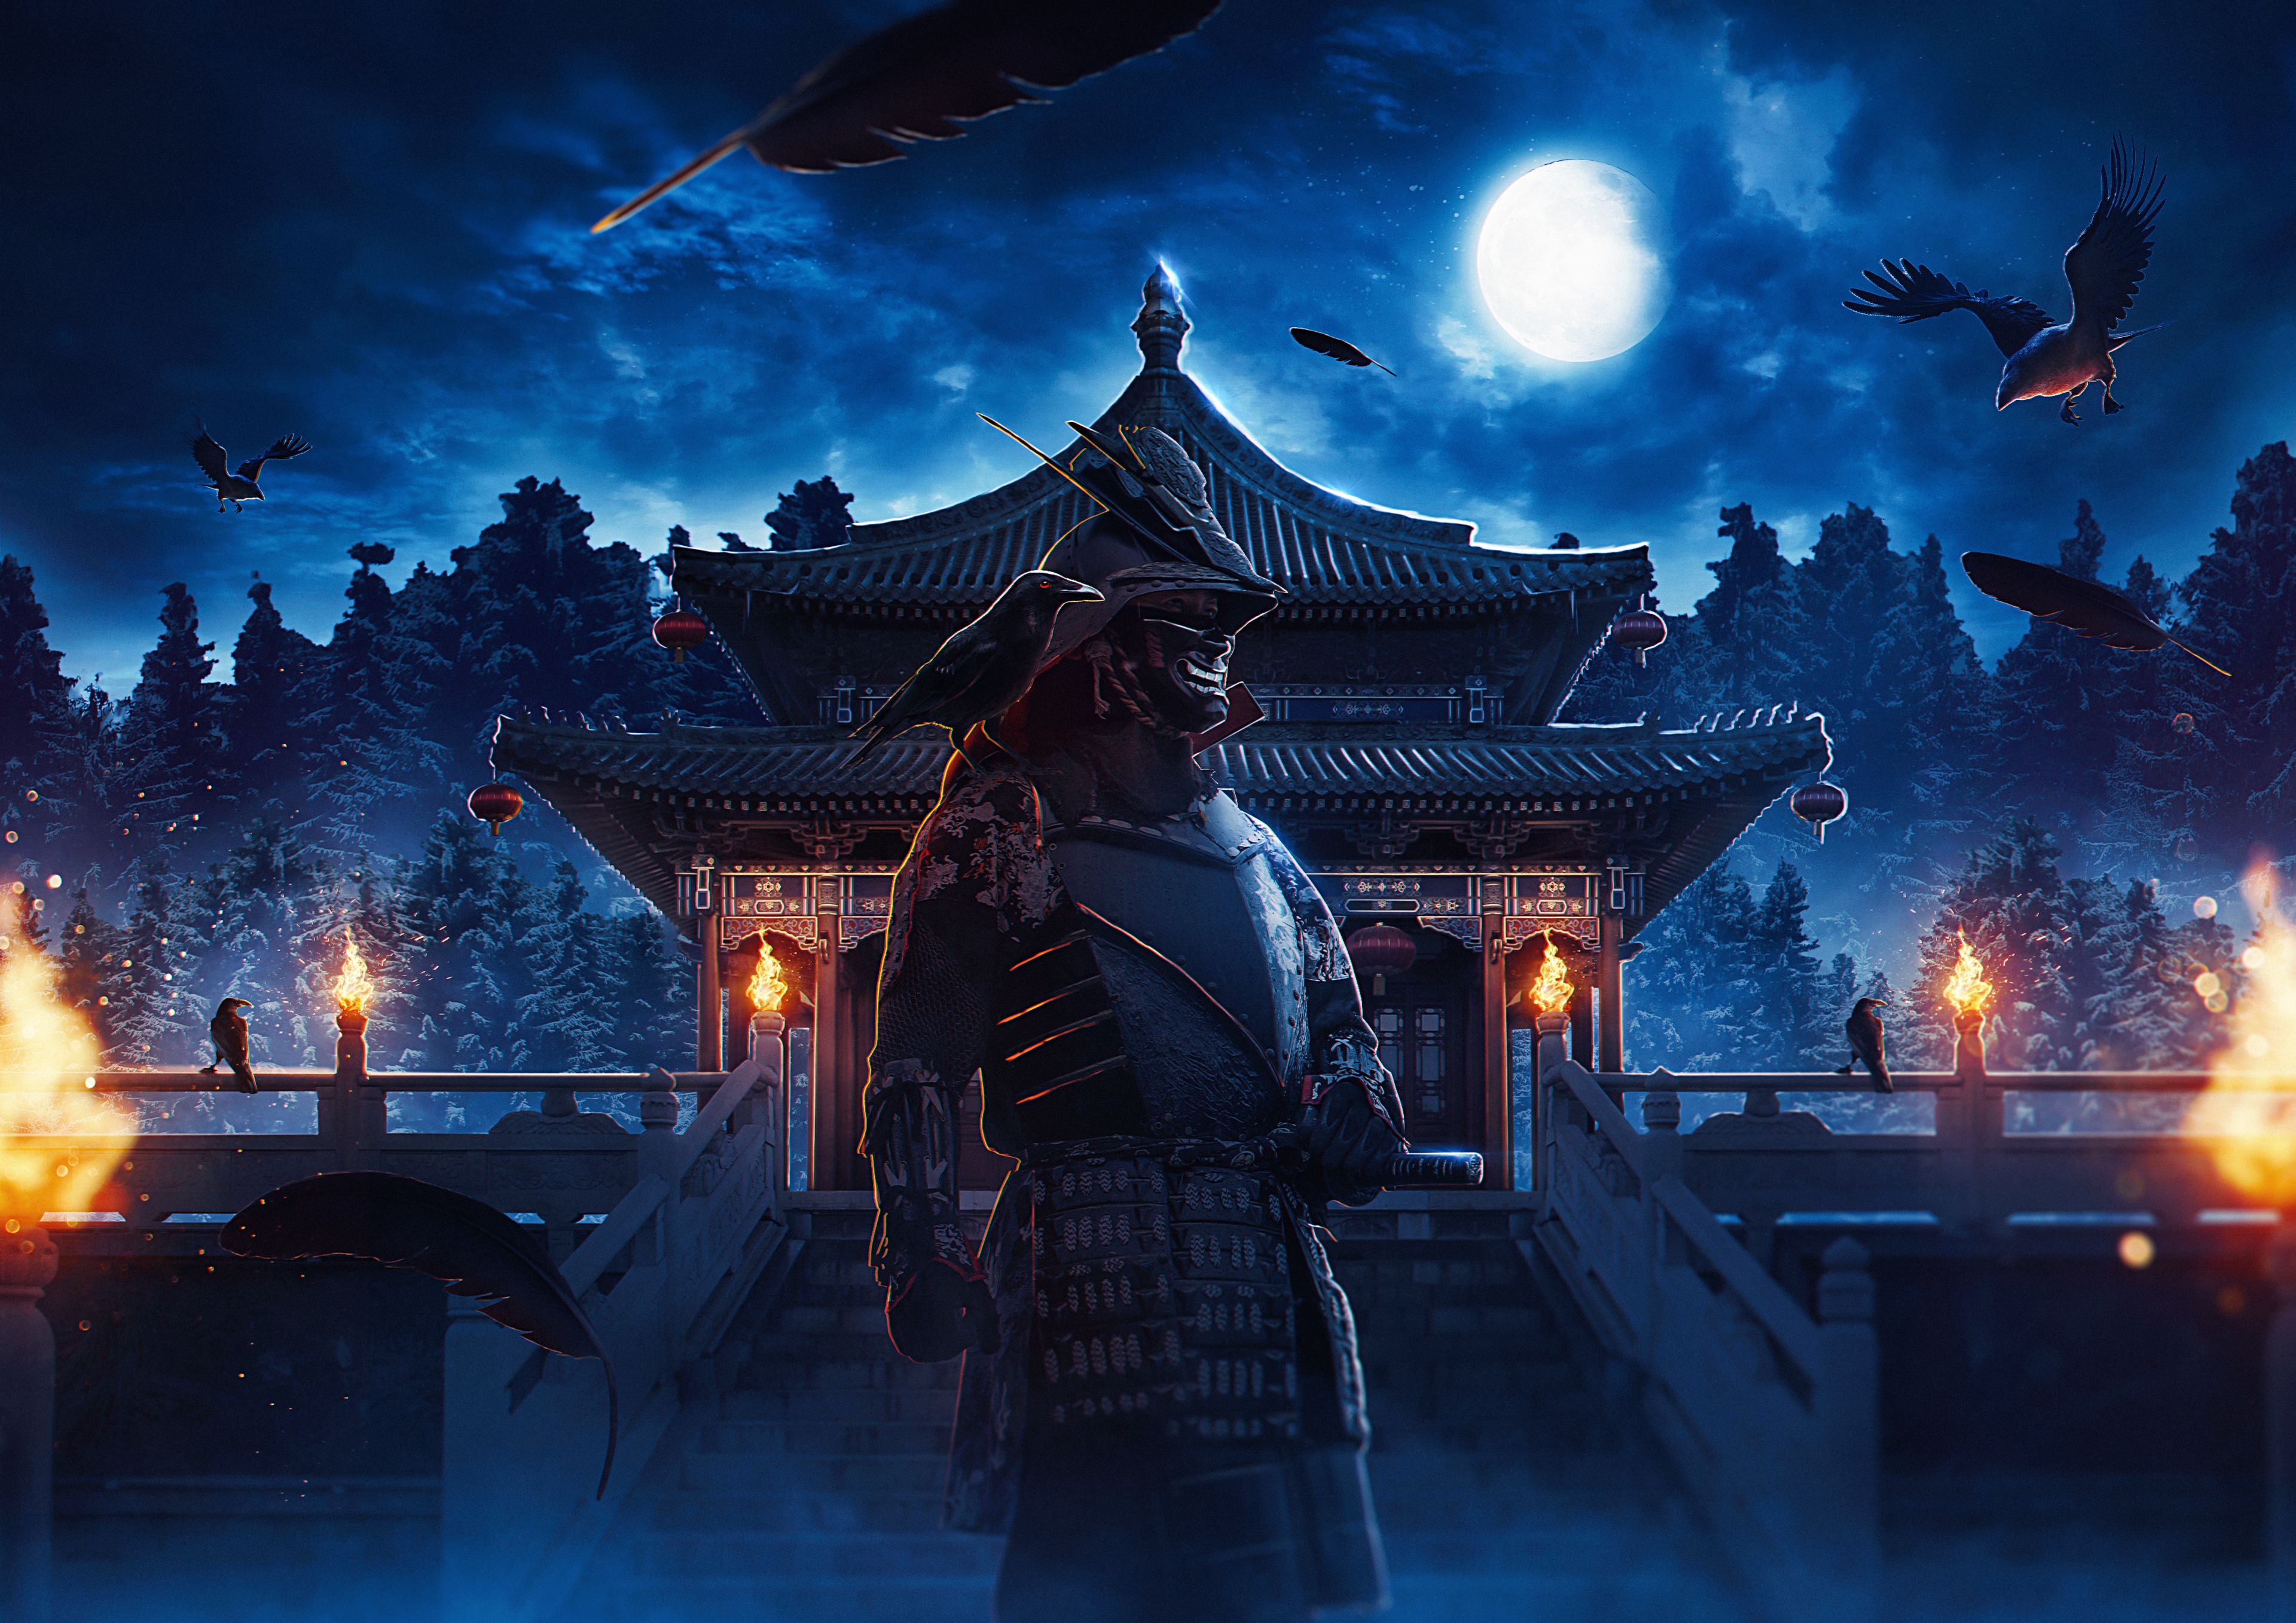 A samurai stands in front of a pagoda at night - Samurai